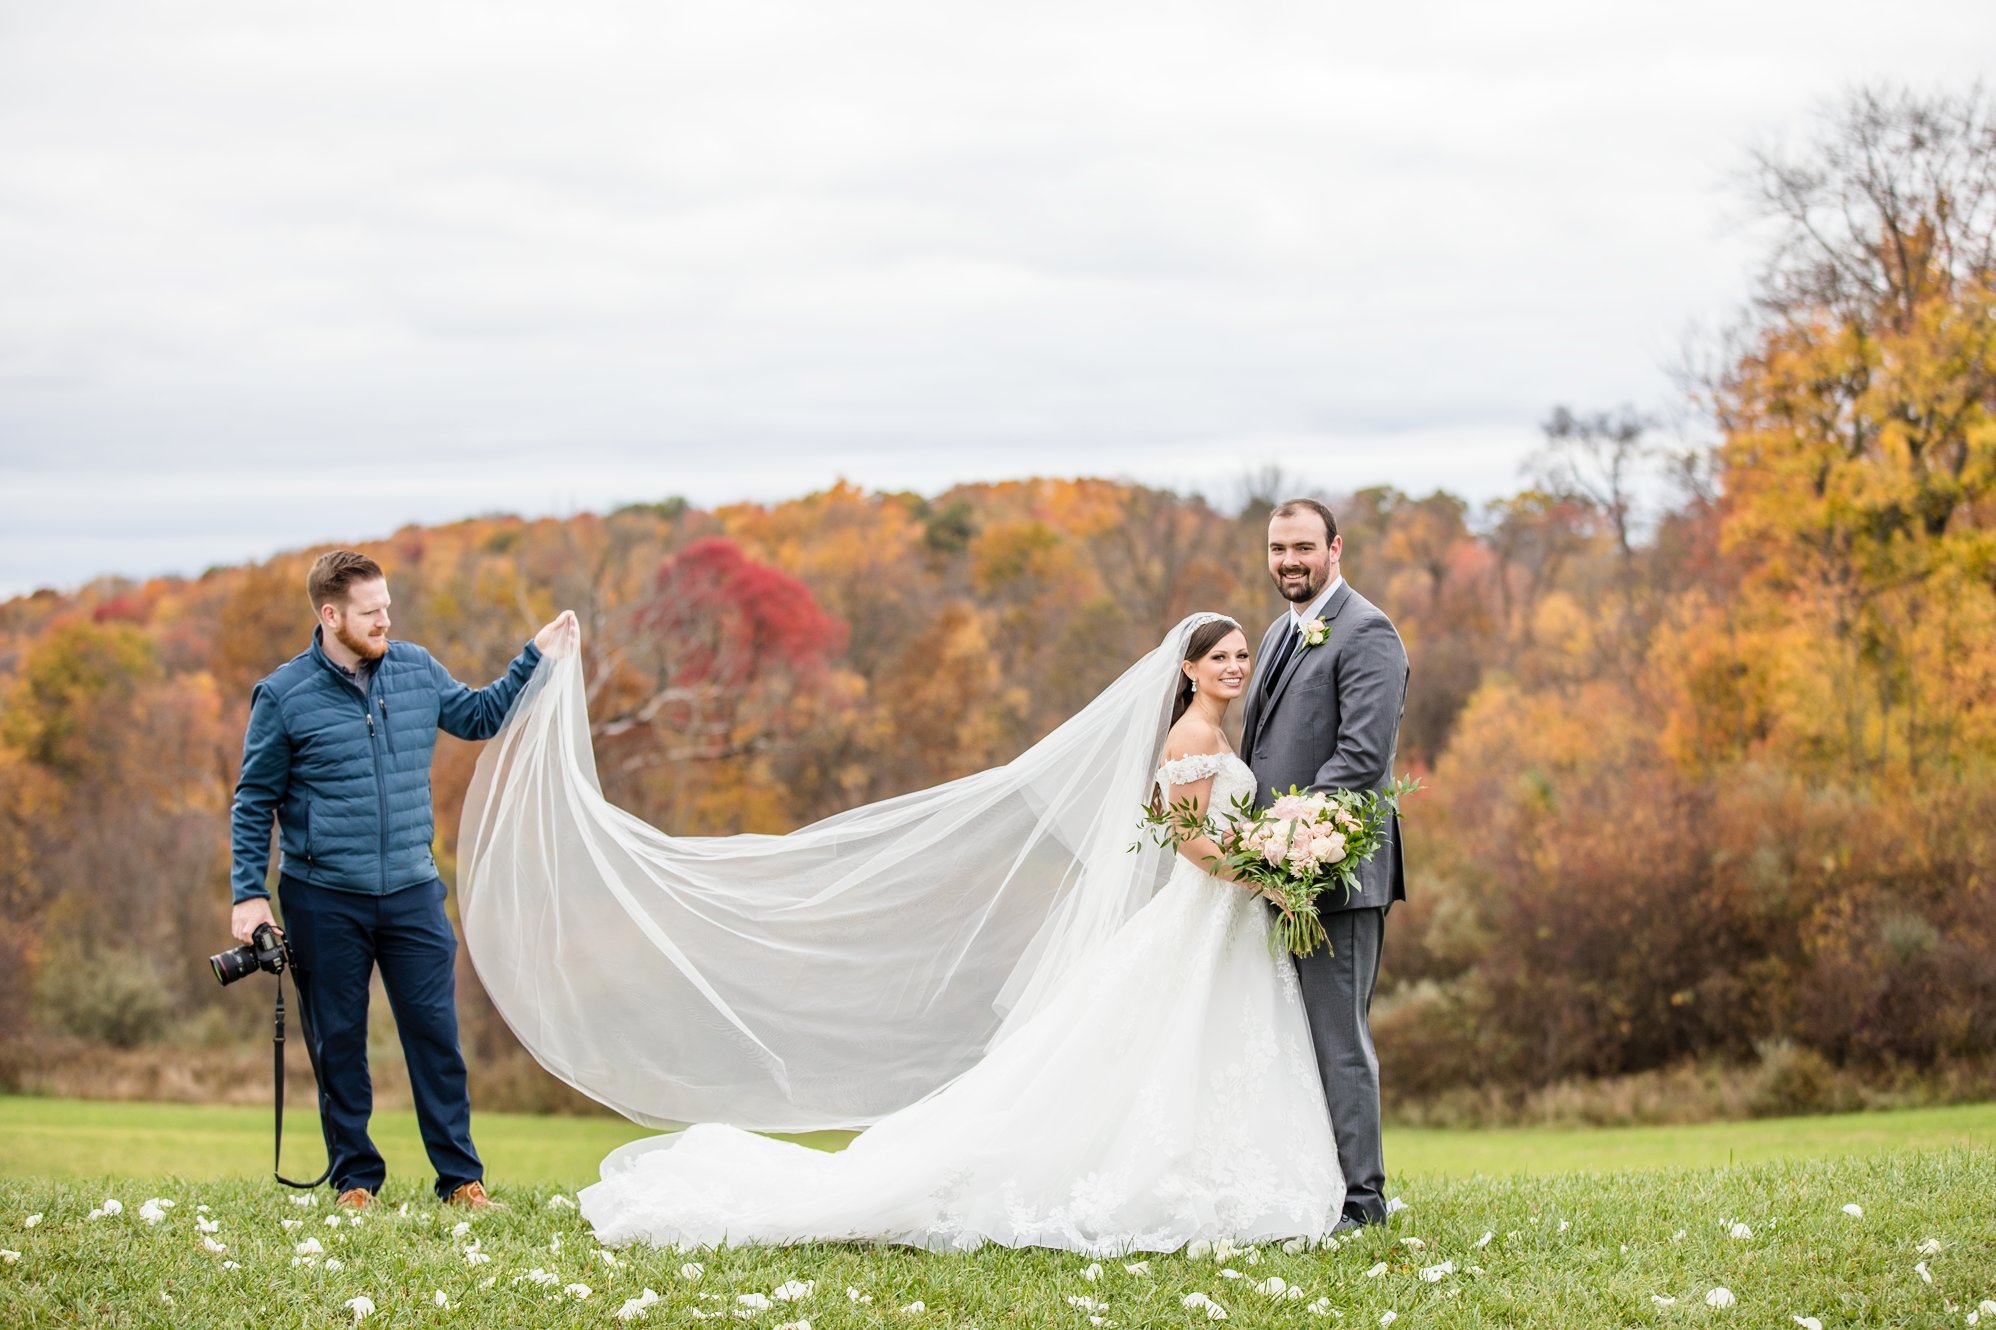  Professional veil fluffer. I don’t think I’ve ever had the pleasure of photographing such beautiful, vibrant fall color before this wedding! 